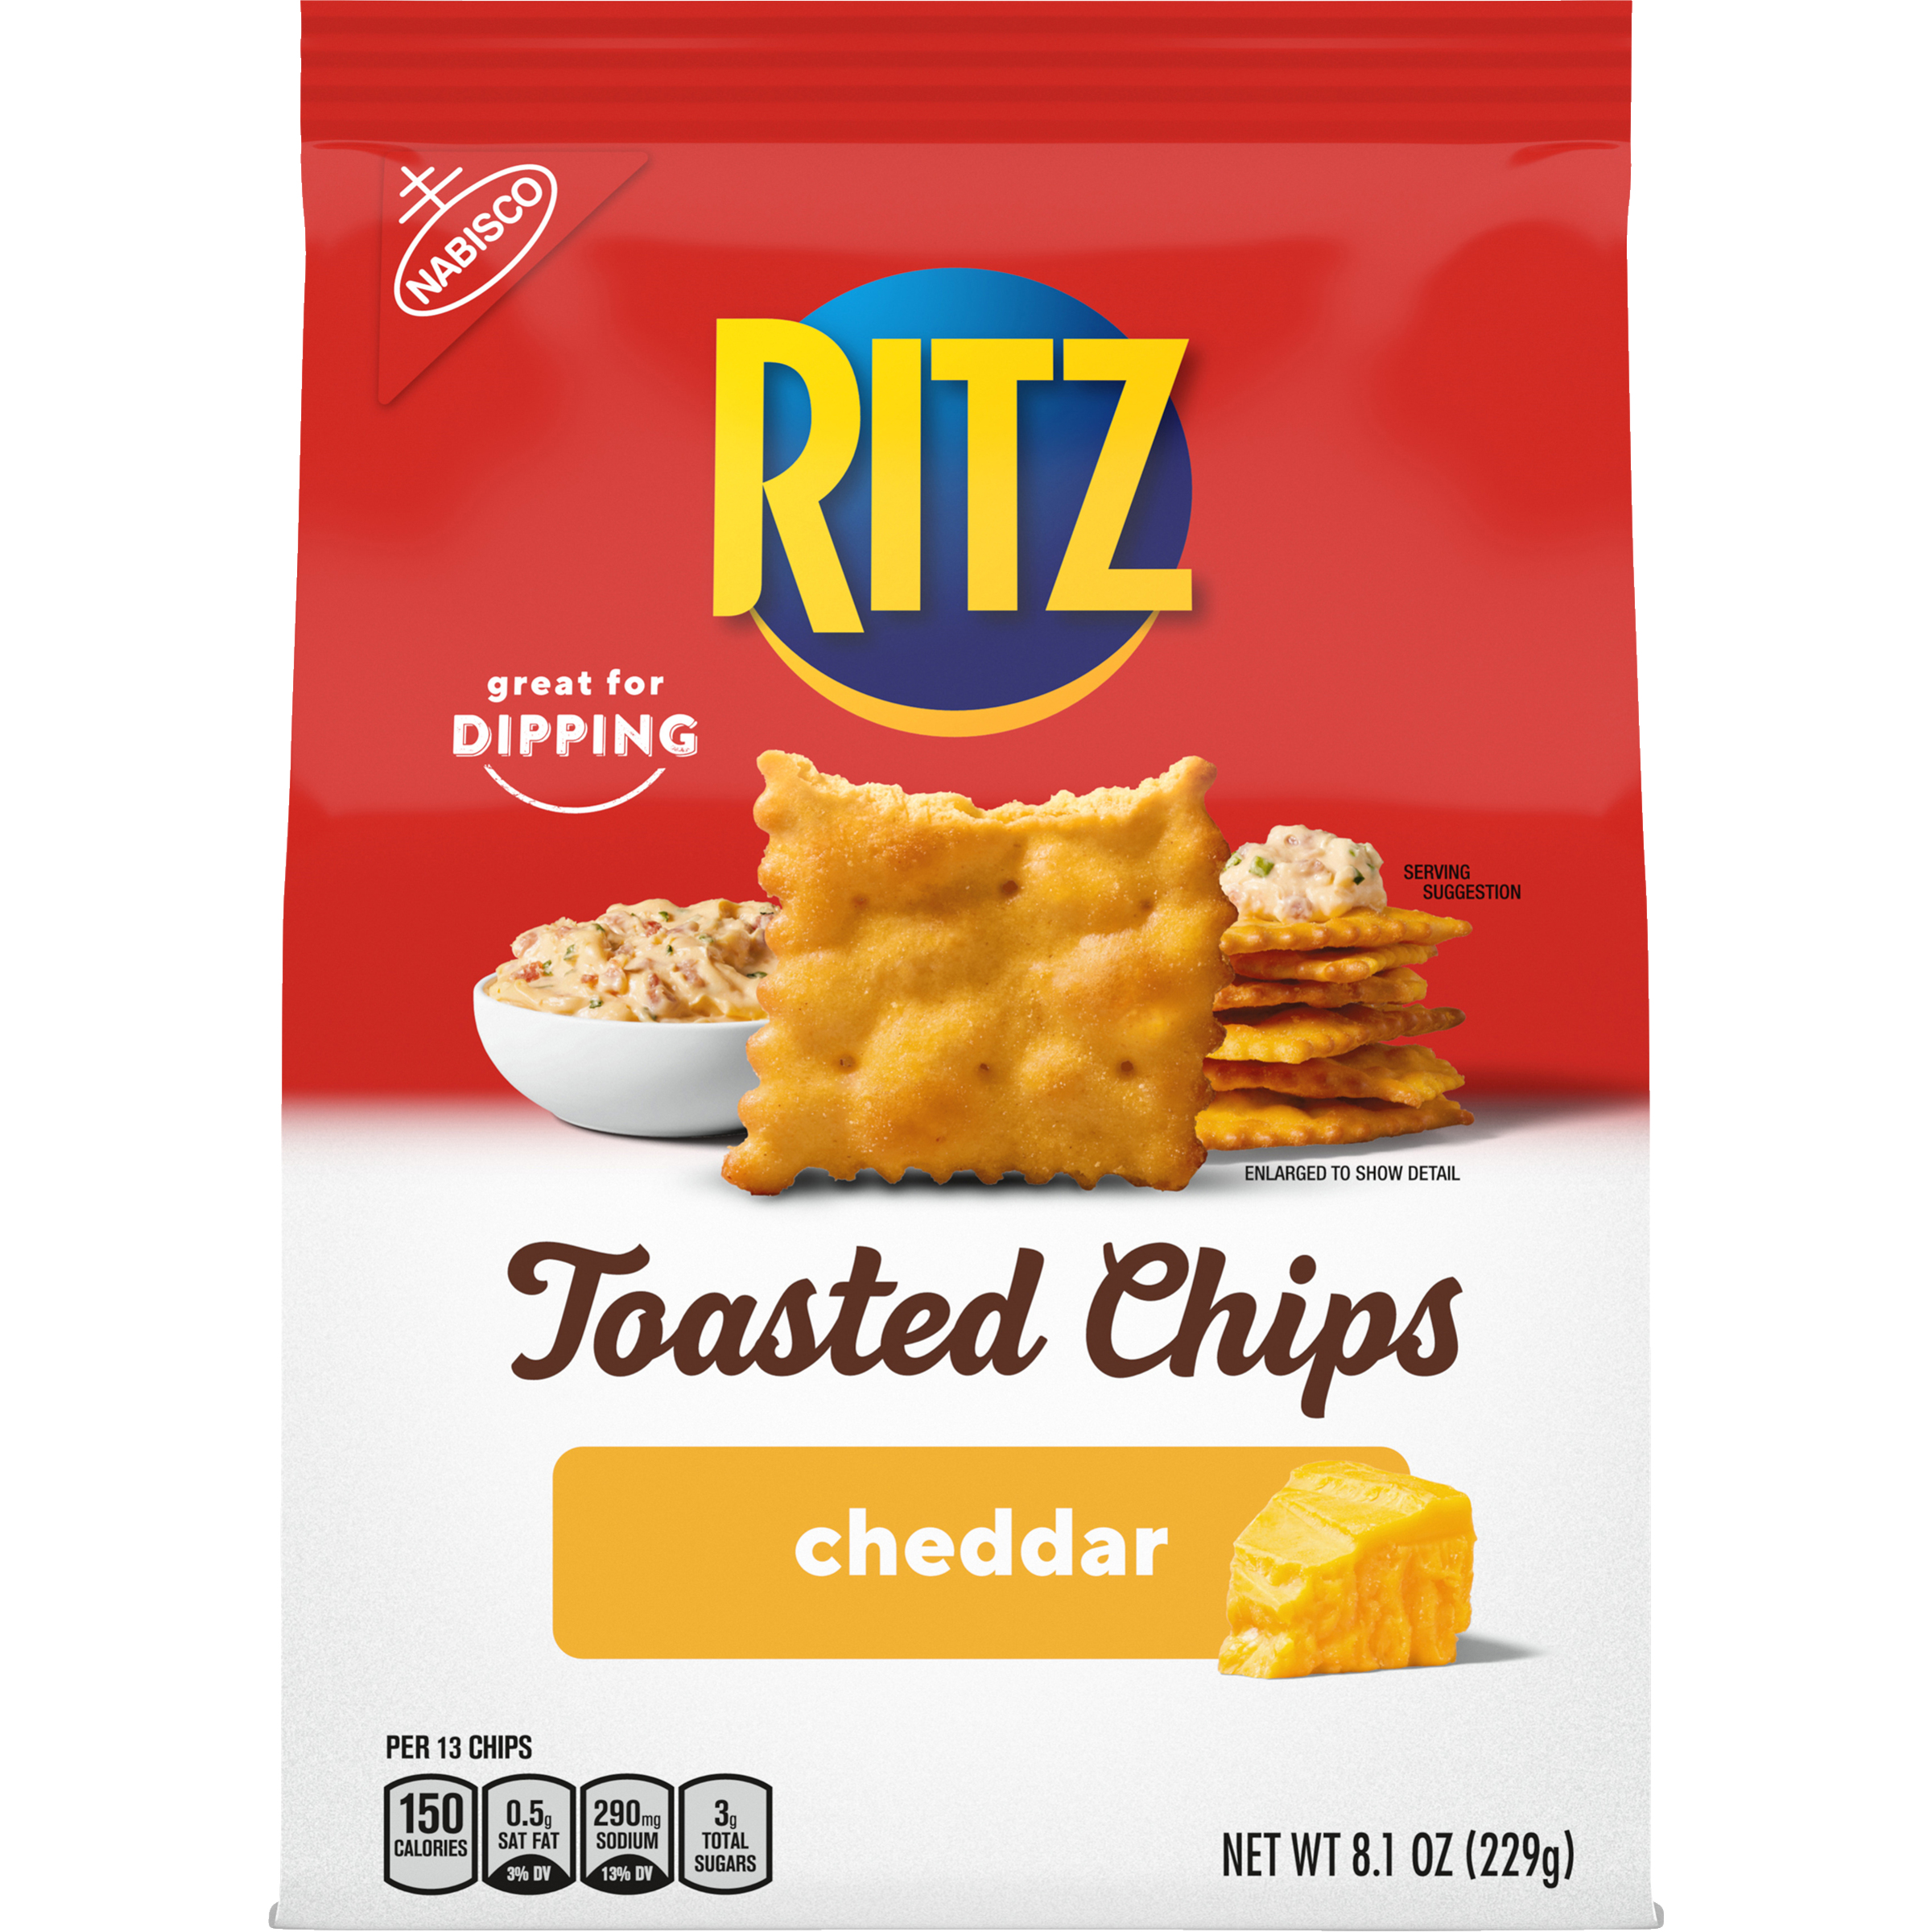 RITZ Toasted Chips Cheddar Crackers, 8.1 oz-1